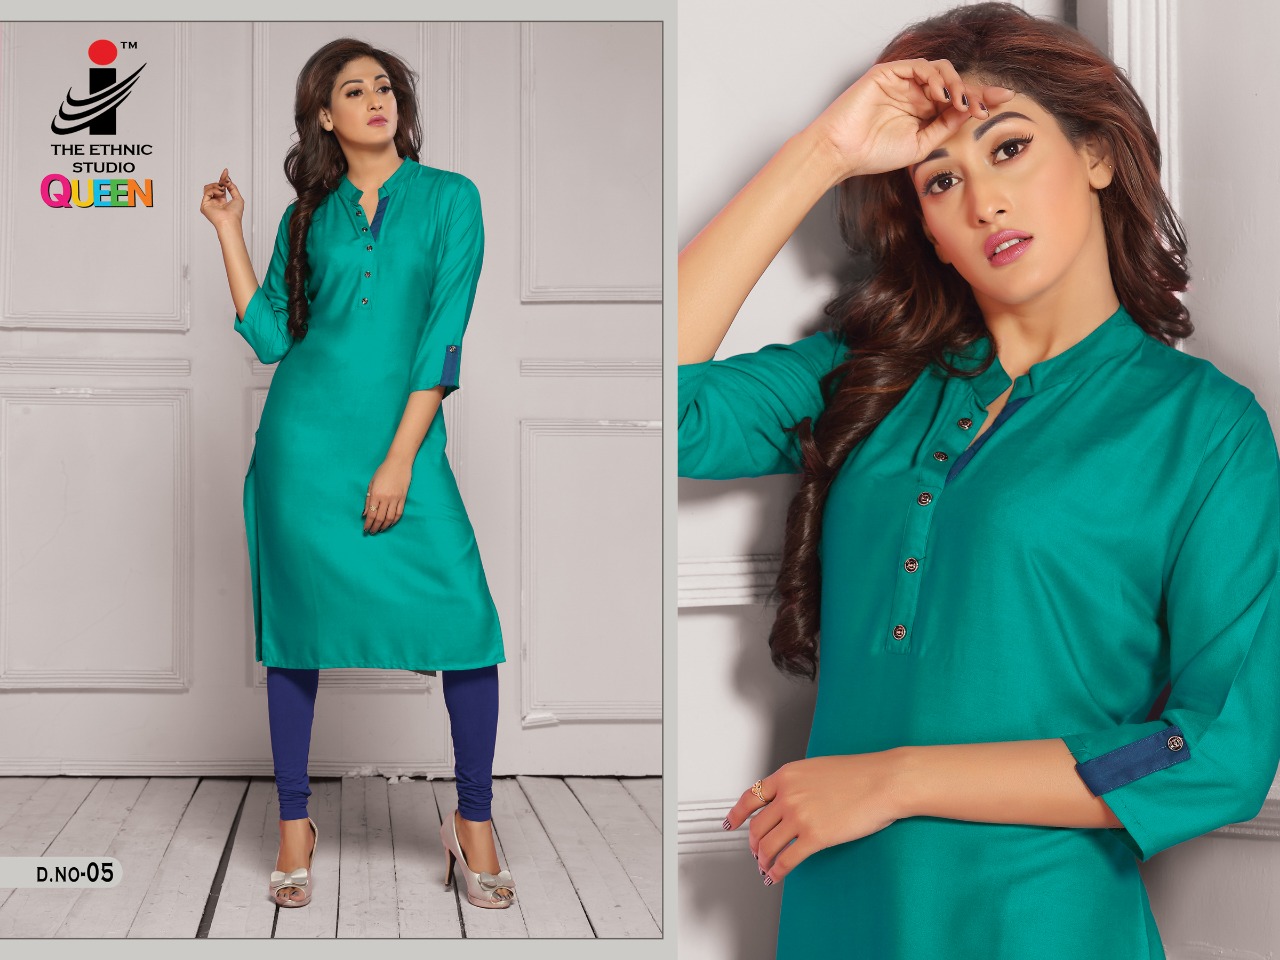 The ethnic studio queen daily wear colourful kurties collection